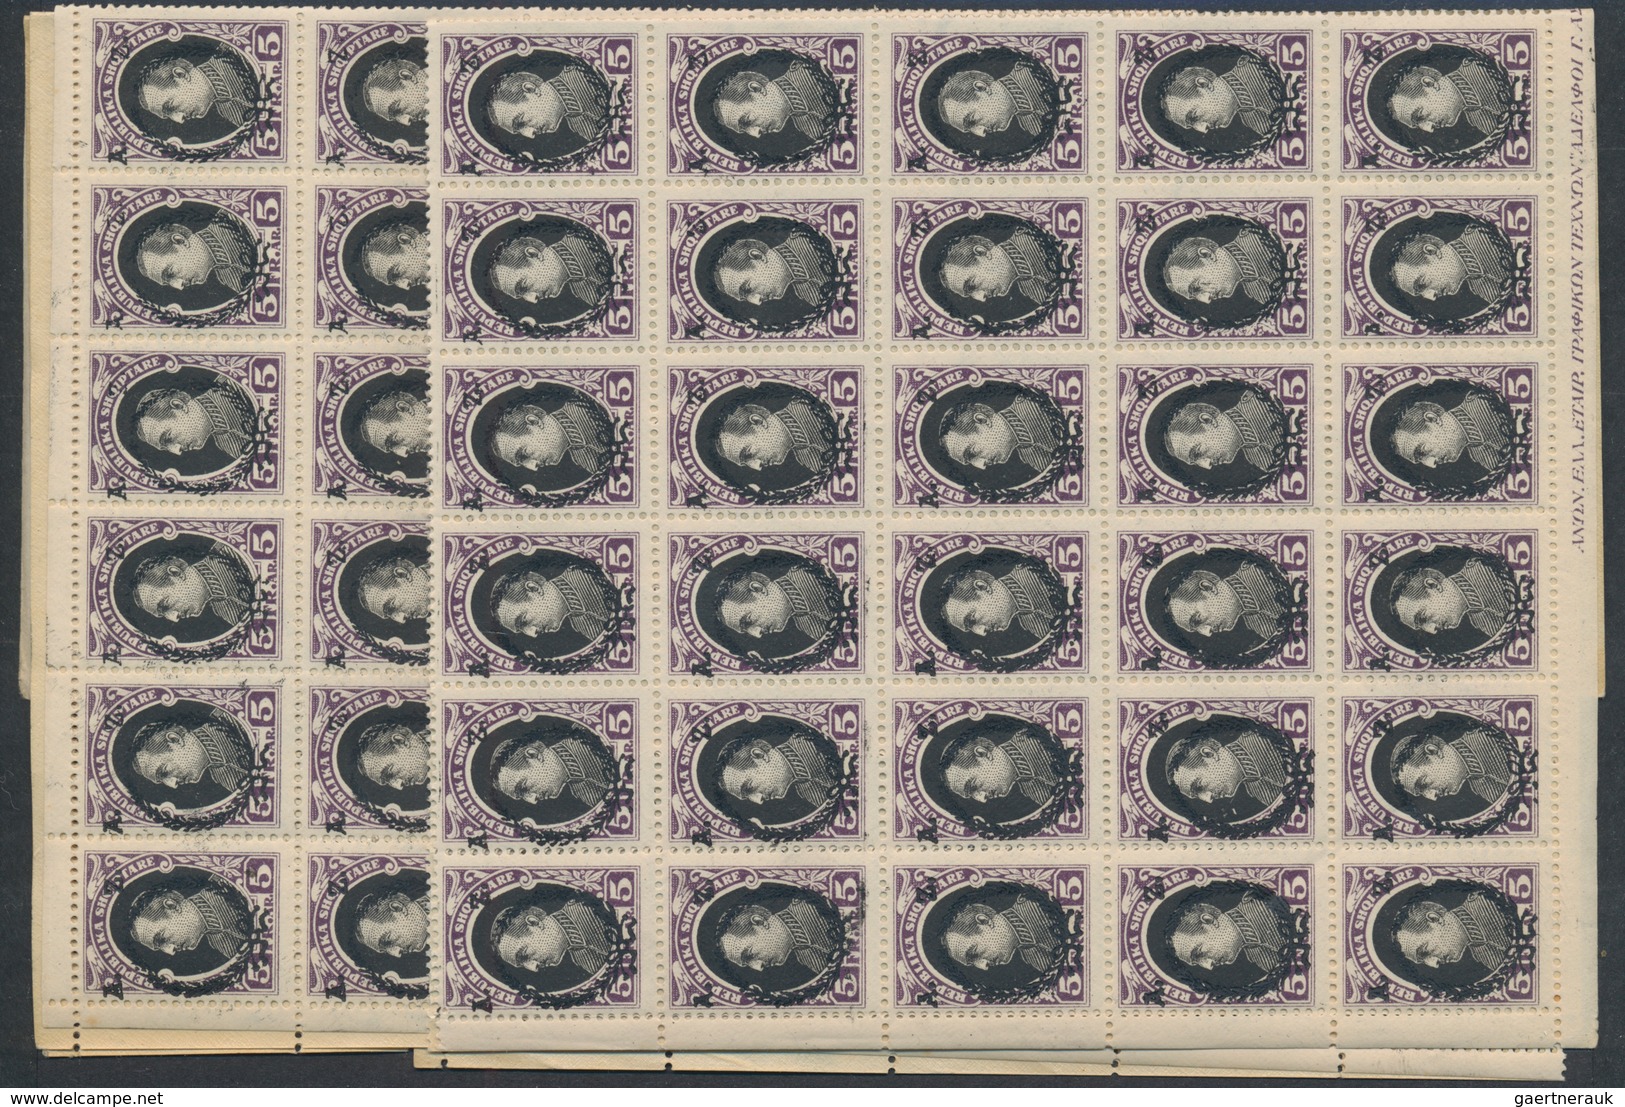 Albanien: 1920/1928, Stock Only MNH Issues In Units Offering These Quantities: Michel No. 74 (150 Co - Albanie